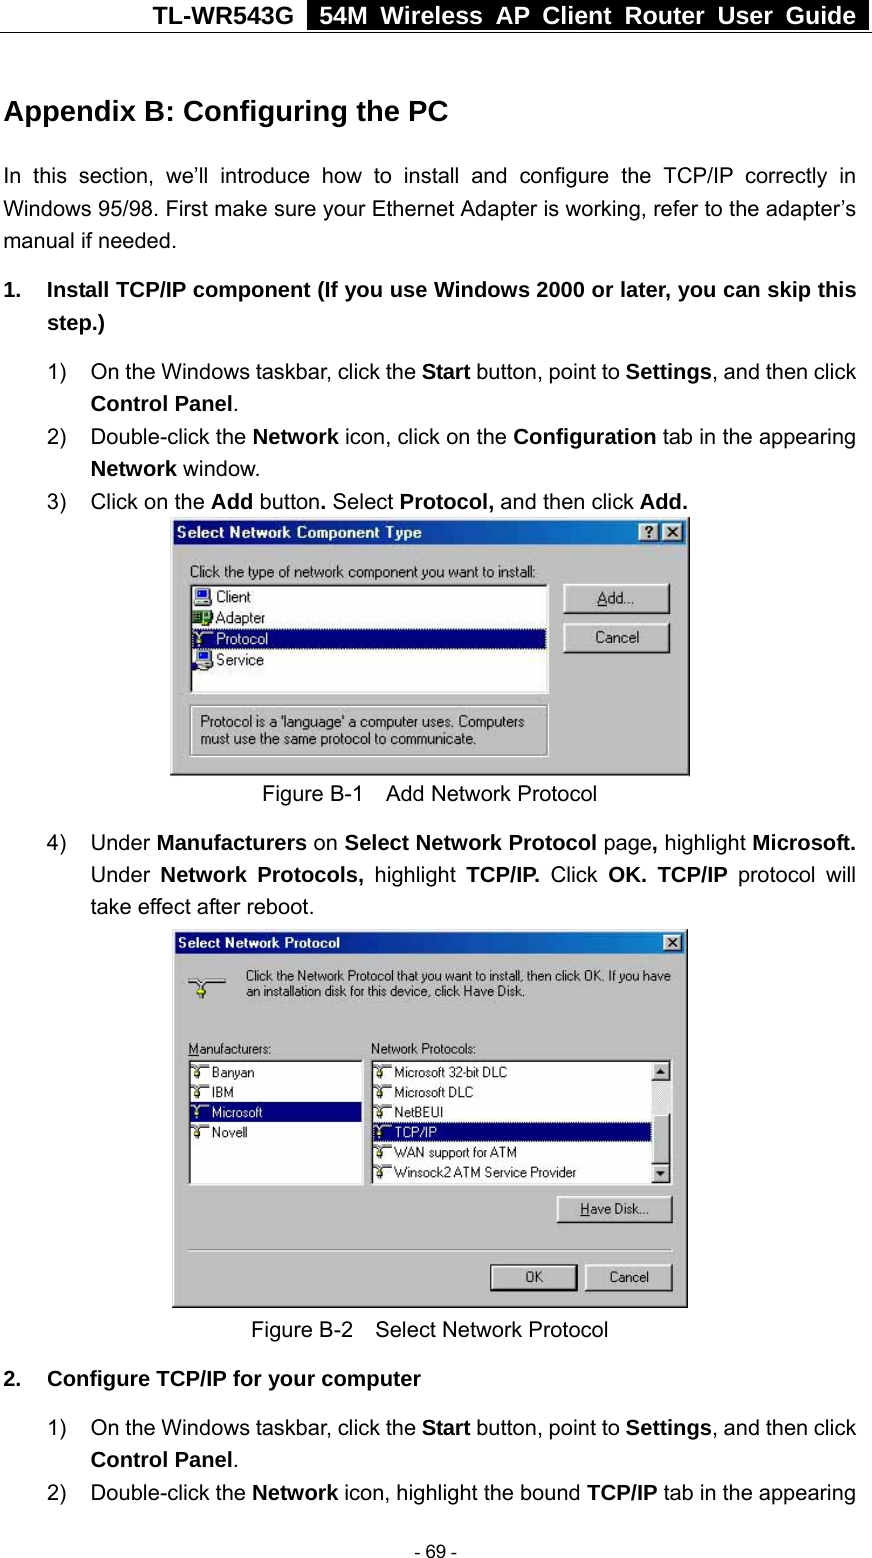 TL-WR543G   54M Wireless AP Client Router User Guide  Appendix B: Configuring the PC In this section, we’ll introduce how to install and configure the TCP/IP correctly in Windows 95/98. First make sure your Ethernet Adapter is working, refer to the adapter’s manual if needed.   1.  Install TCP/IP component (If you use Windows 2000 or later, you can skip this step.) 1)  On the Windows taskbar, click the Start button, point to Settings, and then click Control Panel. 2) Double-click the Network icon, click on the Configuration tab in the appearing Network window.  3)  Click on the Add button. Select Protocol, and then click Add.  Figure B-1    Add Network Protocol 4) Under Manufacturers on Select Network Protocol page, highlight Microsoft. Under Network Protocols, highlight TCP/IP. Click OK. TCP/IP protocol will take effect after reboot.  Figure B-2    Select Network Protocol 2.  Configure TCP/IP for your computer 1)  On the Windows taskbar, click the Start button, point to Settings, and then click Control Panel. 2) Double-click the Network icon, highlight the bound TCP/IP tab in the appearing  - 69 - 